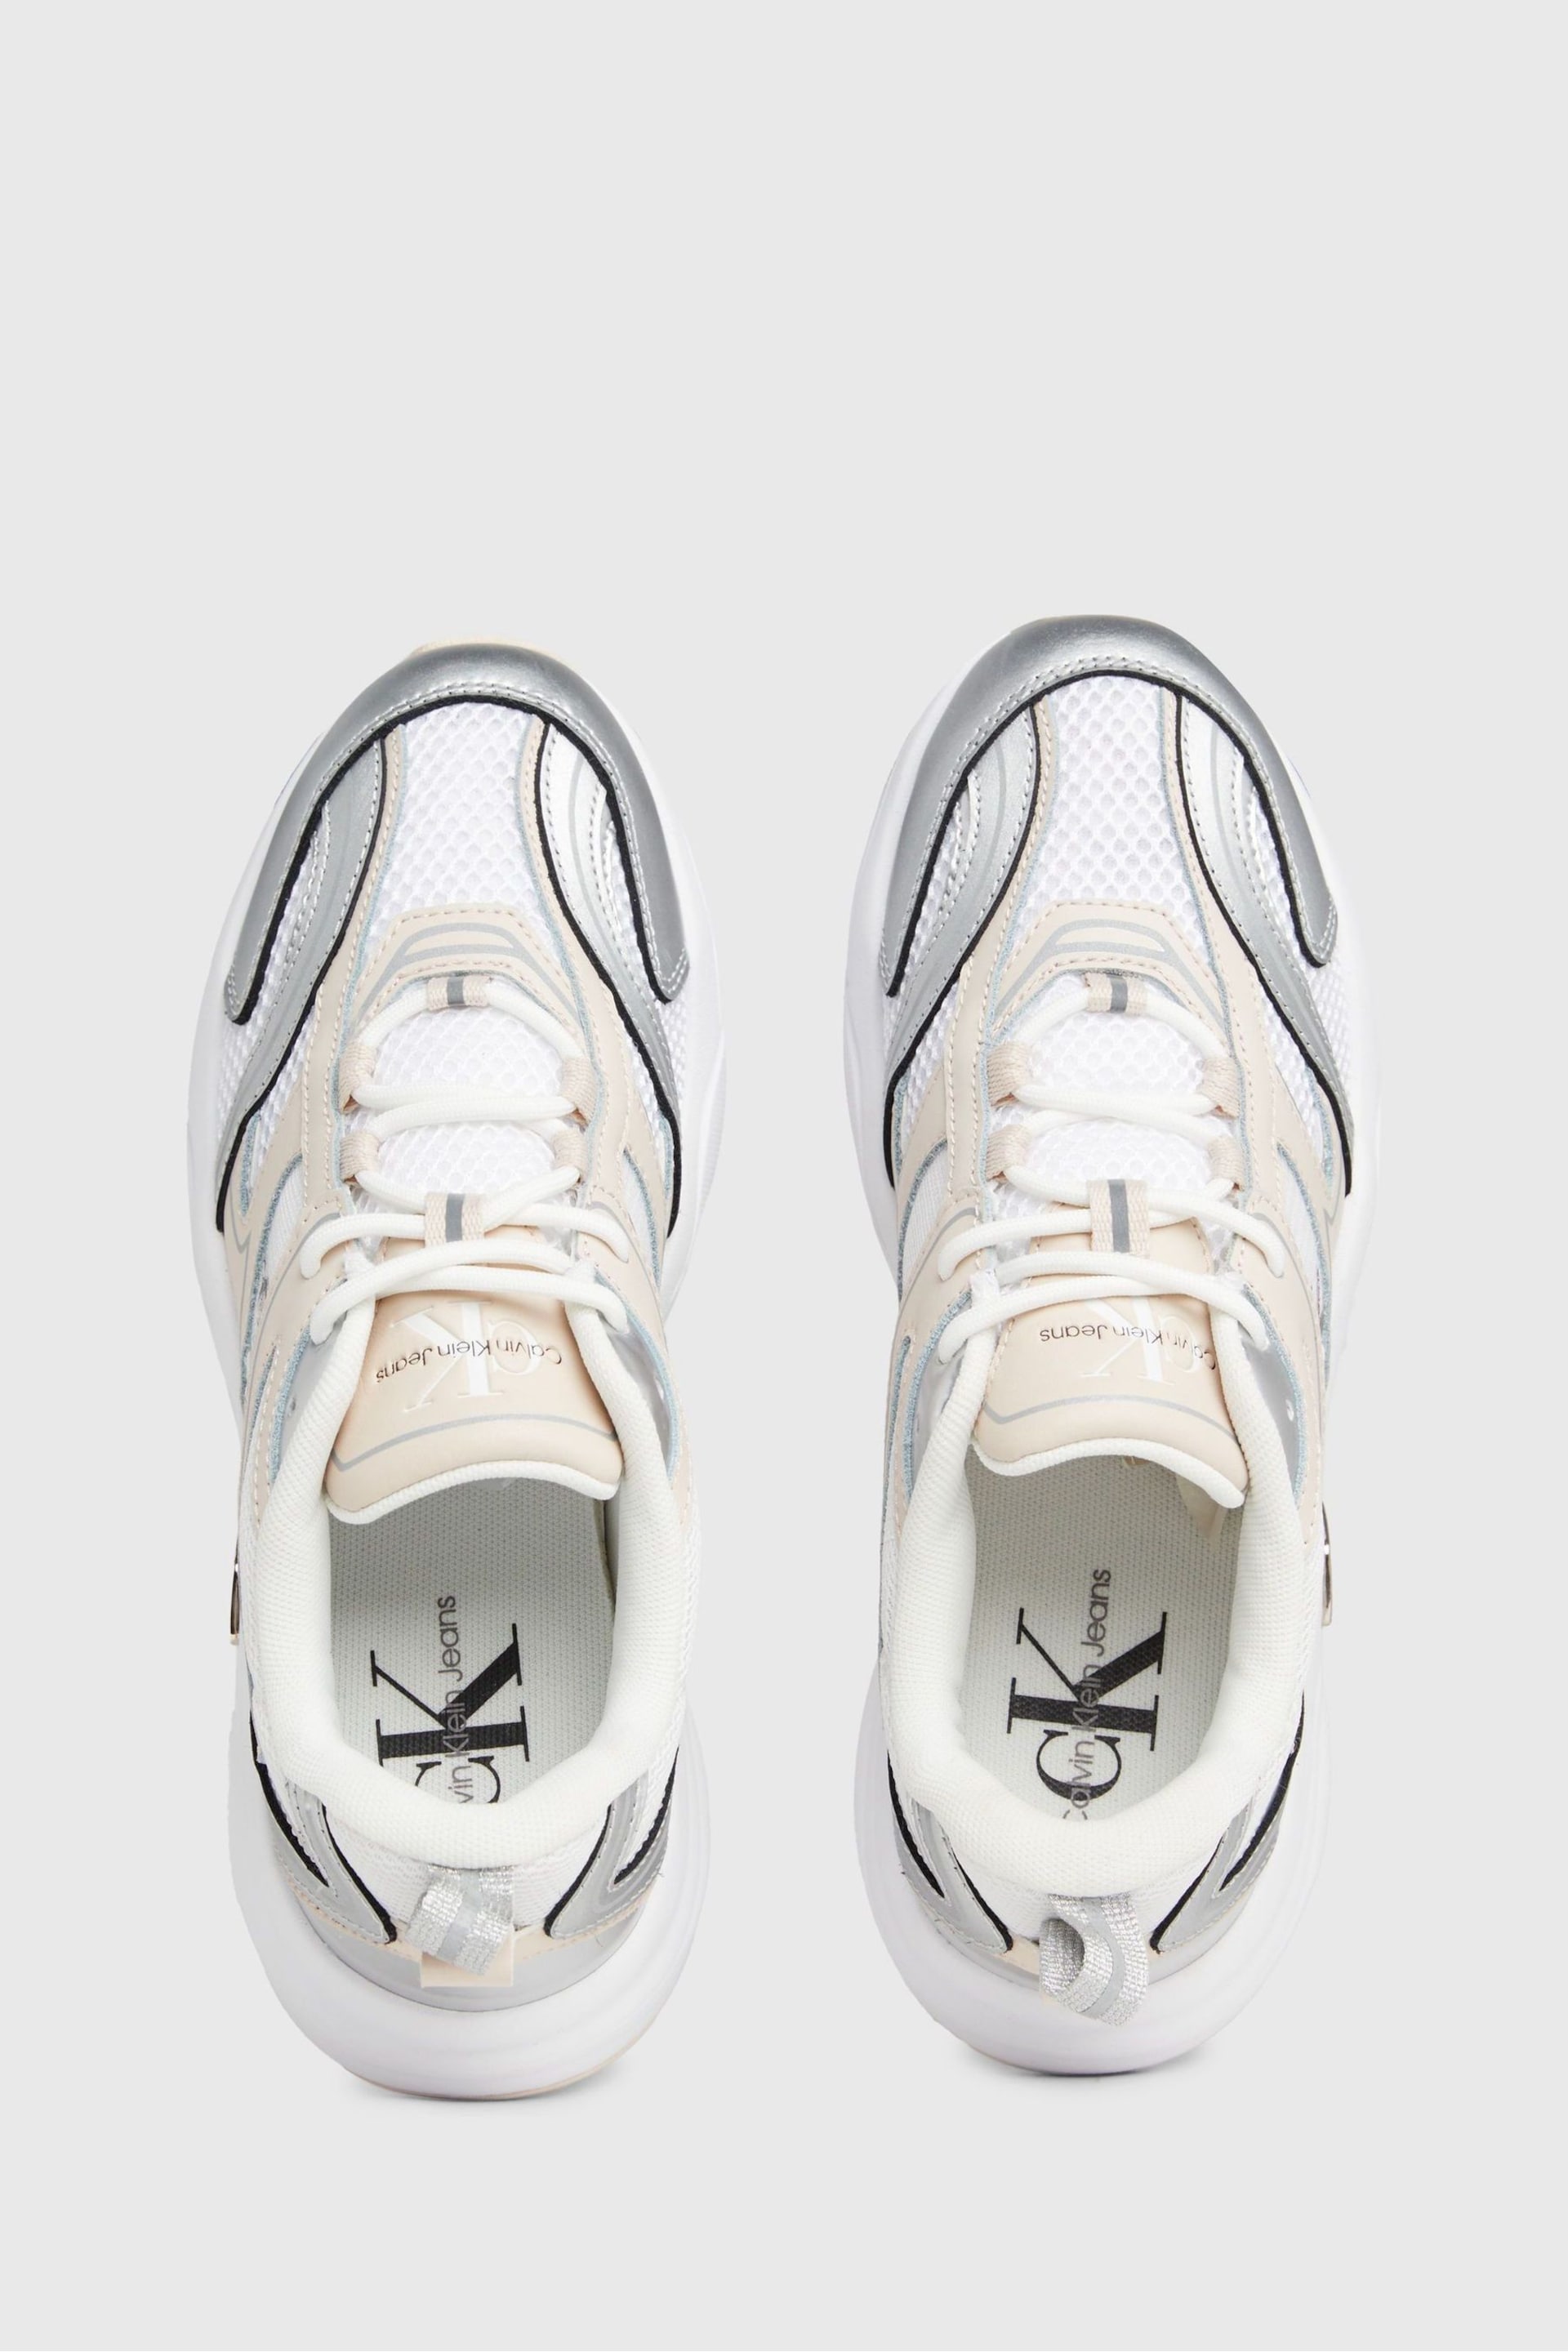 Calvin Klein White Retro Tennis Low Lace Trainers - Image 2 of 6